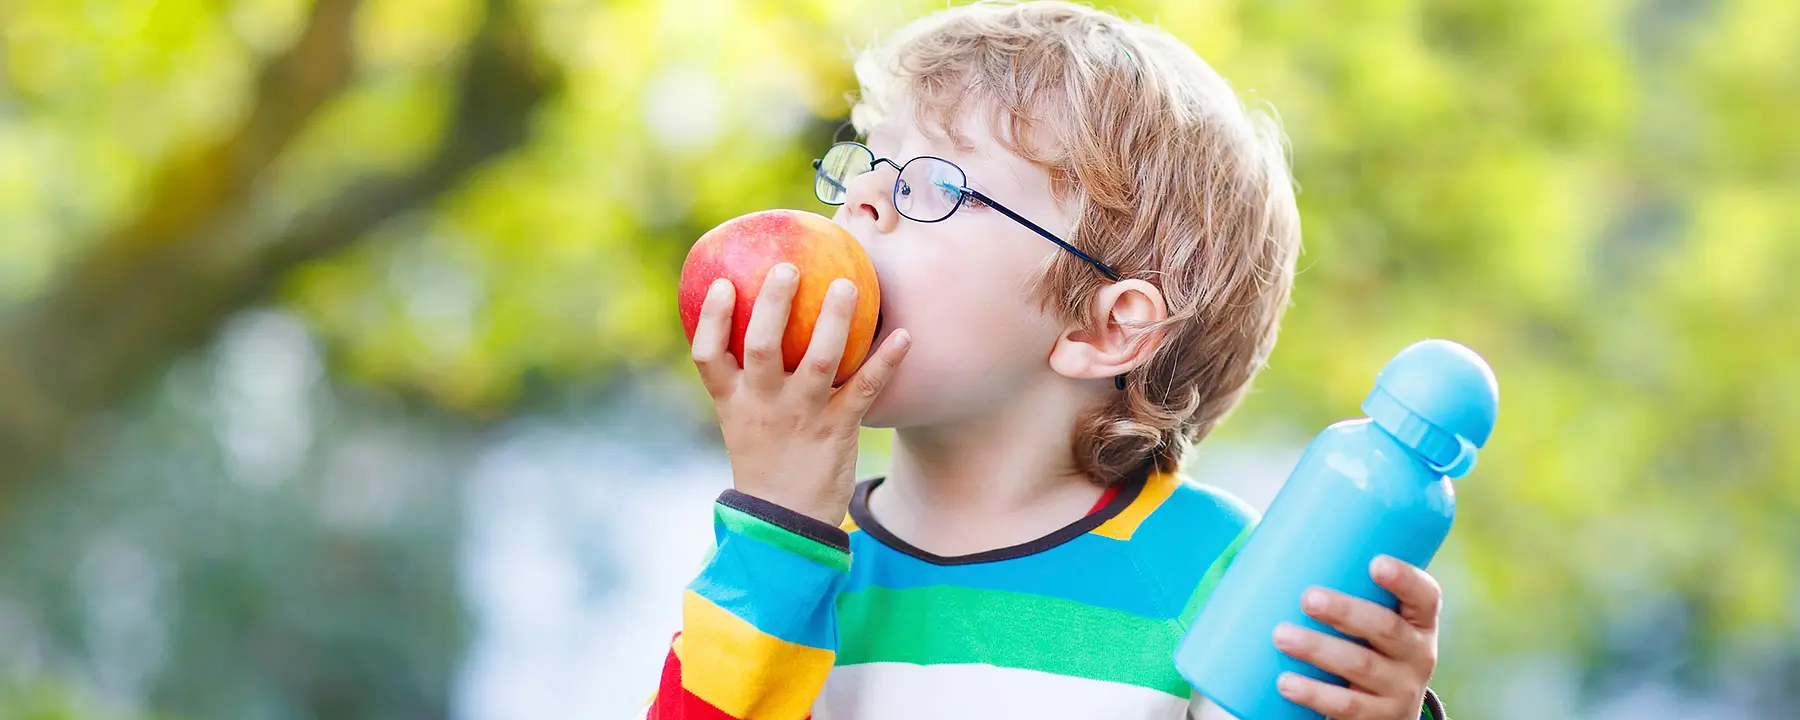 A boy eating an apple and holding a water bottle